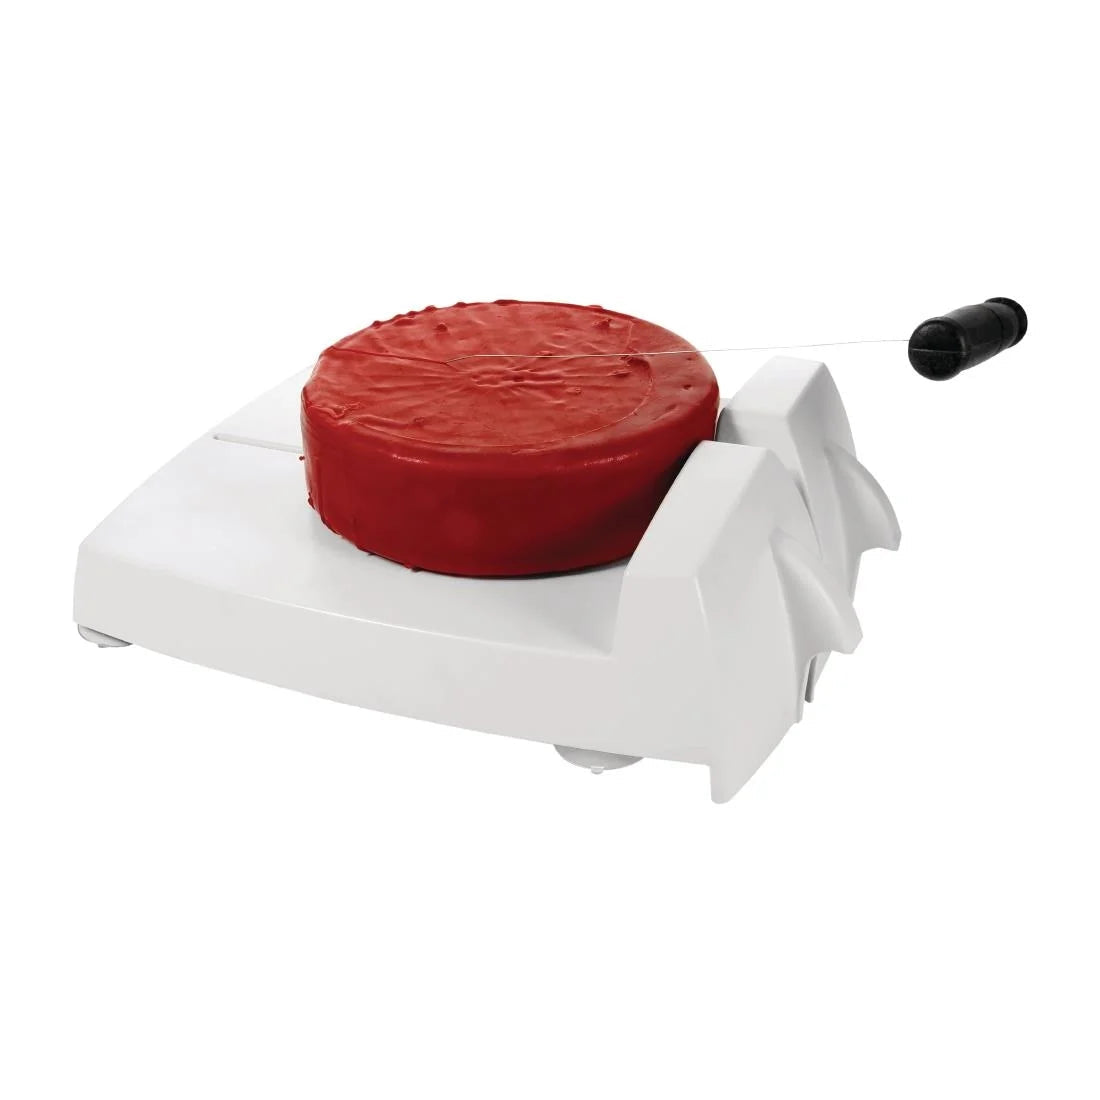 CL068 Cheese Slicing Board White JD Catering Equipment Solutions Ltd